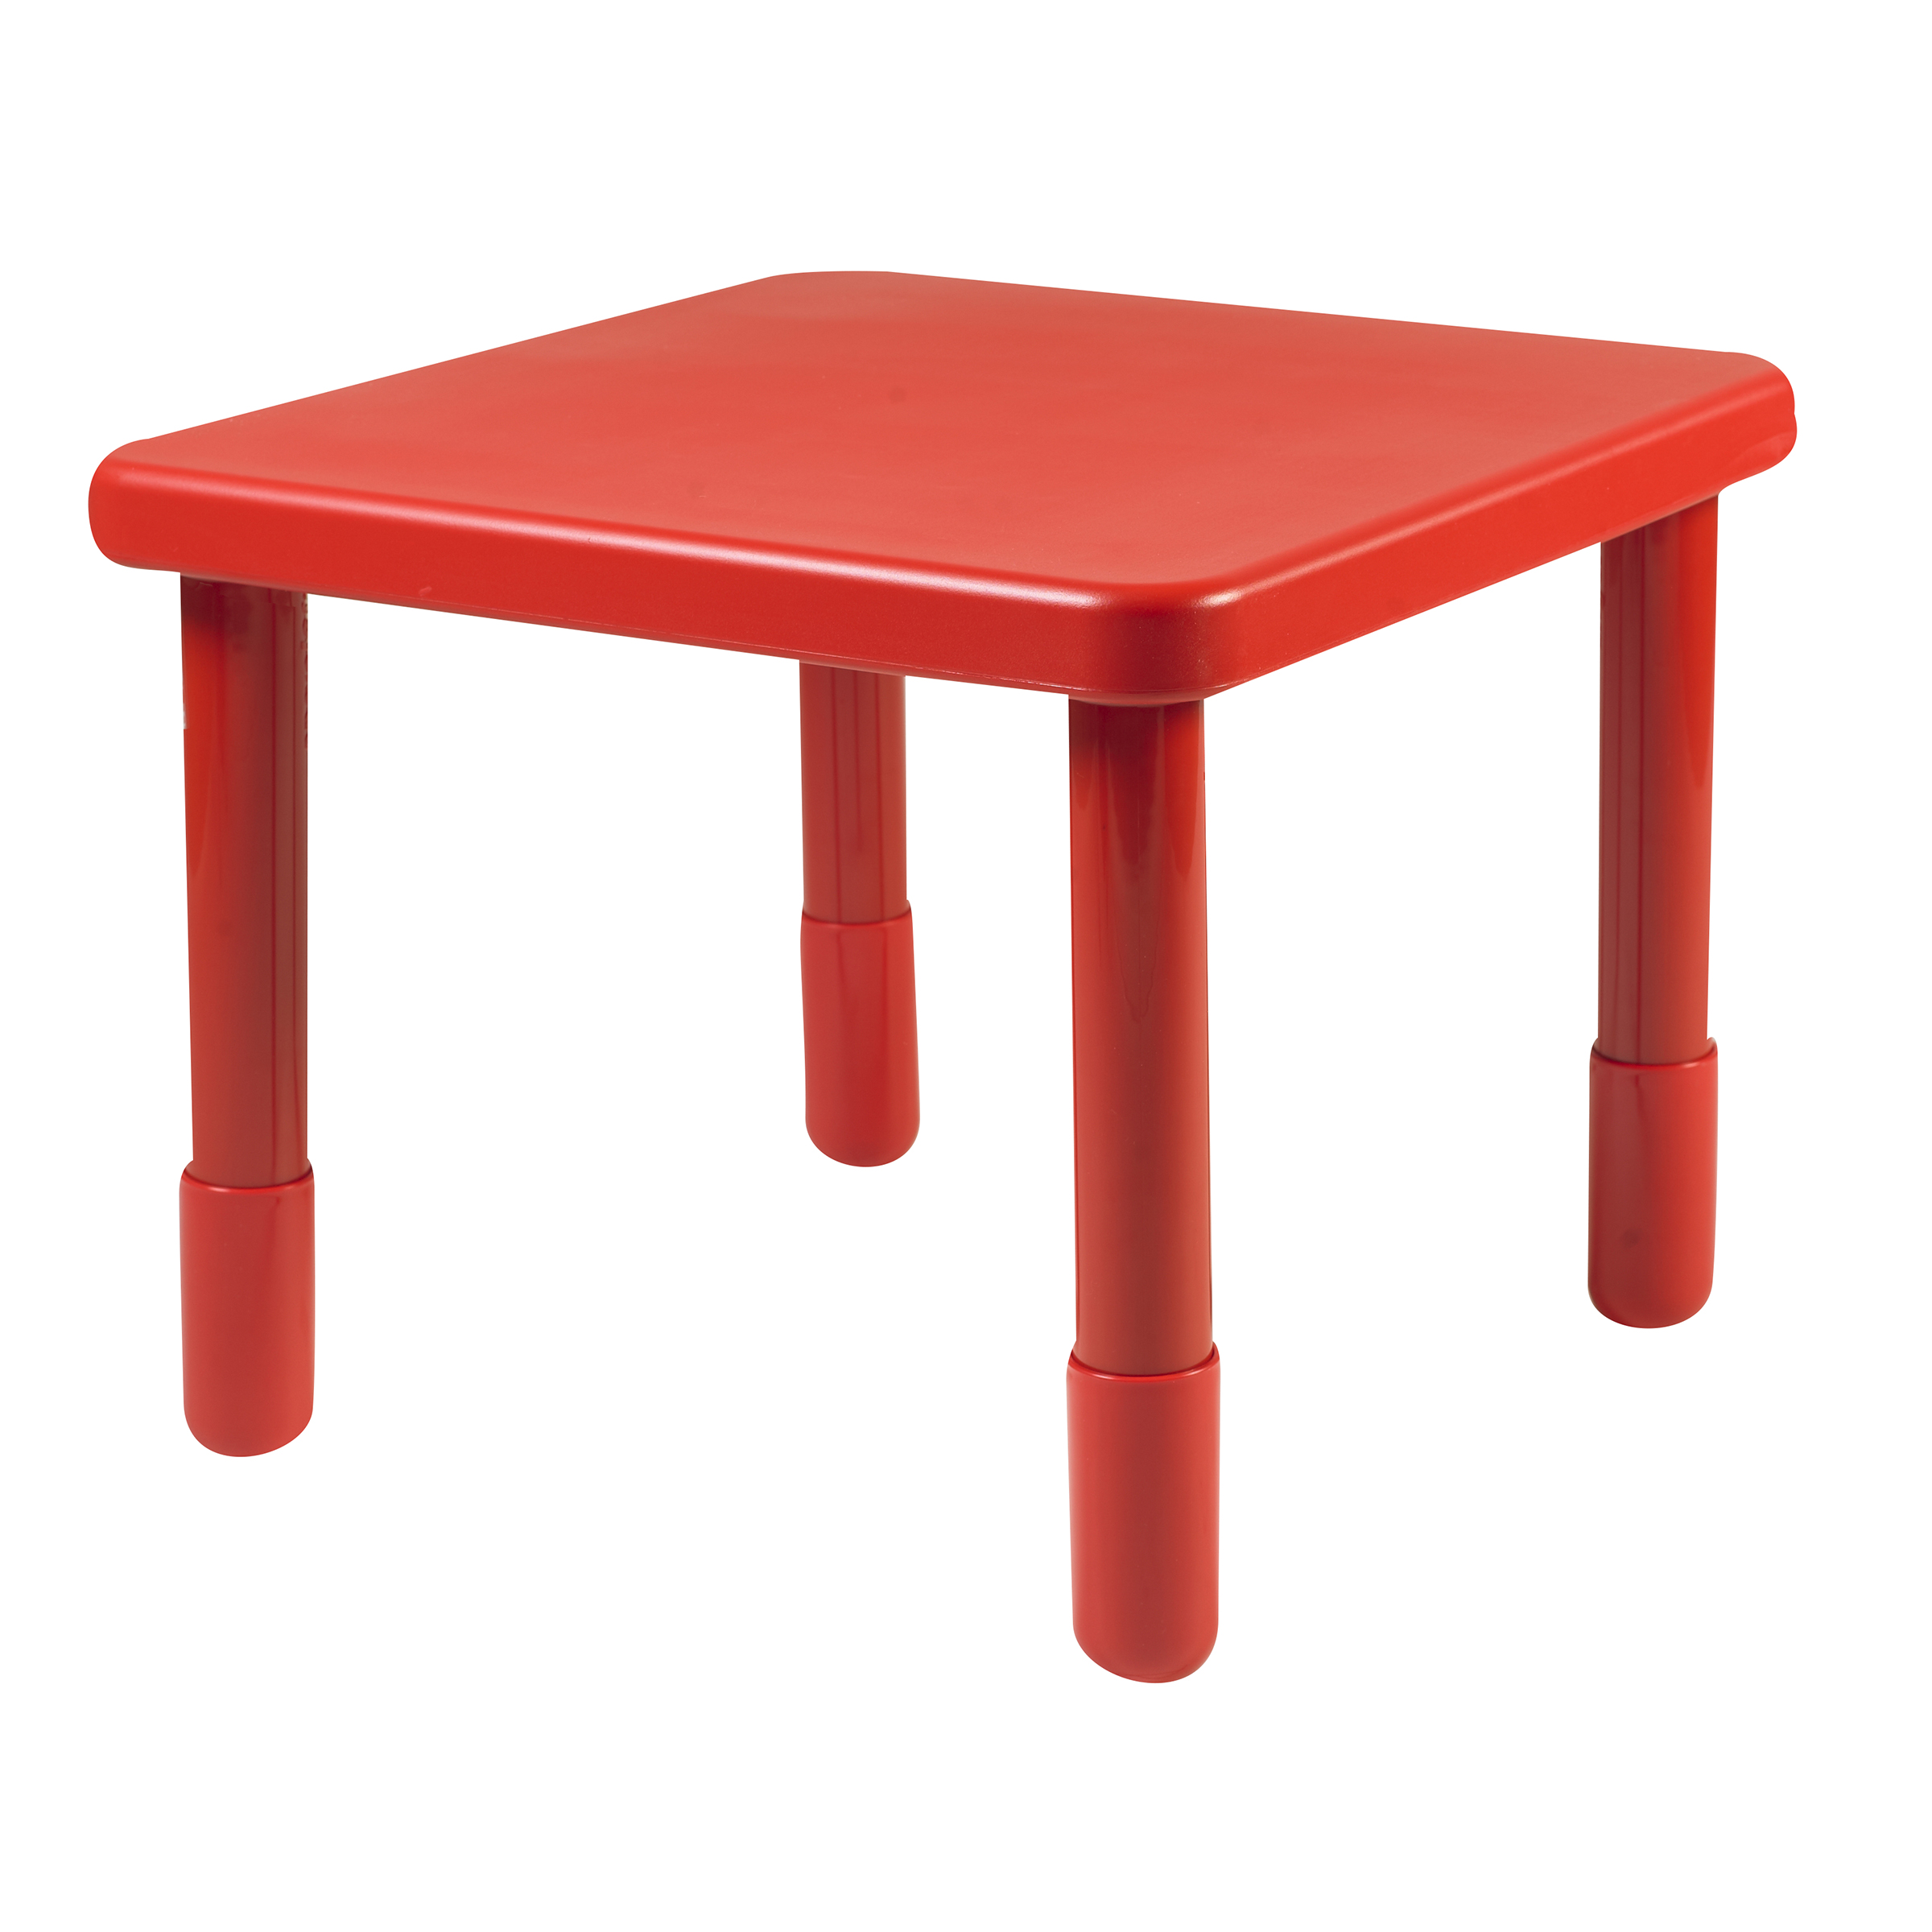 Value 61 cm  Square Table - Candy Apple Red with 51 cm  Legs